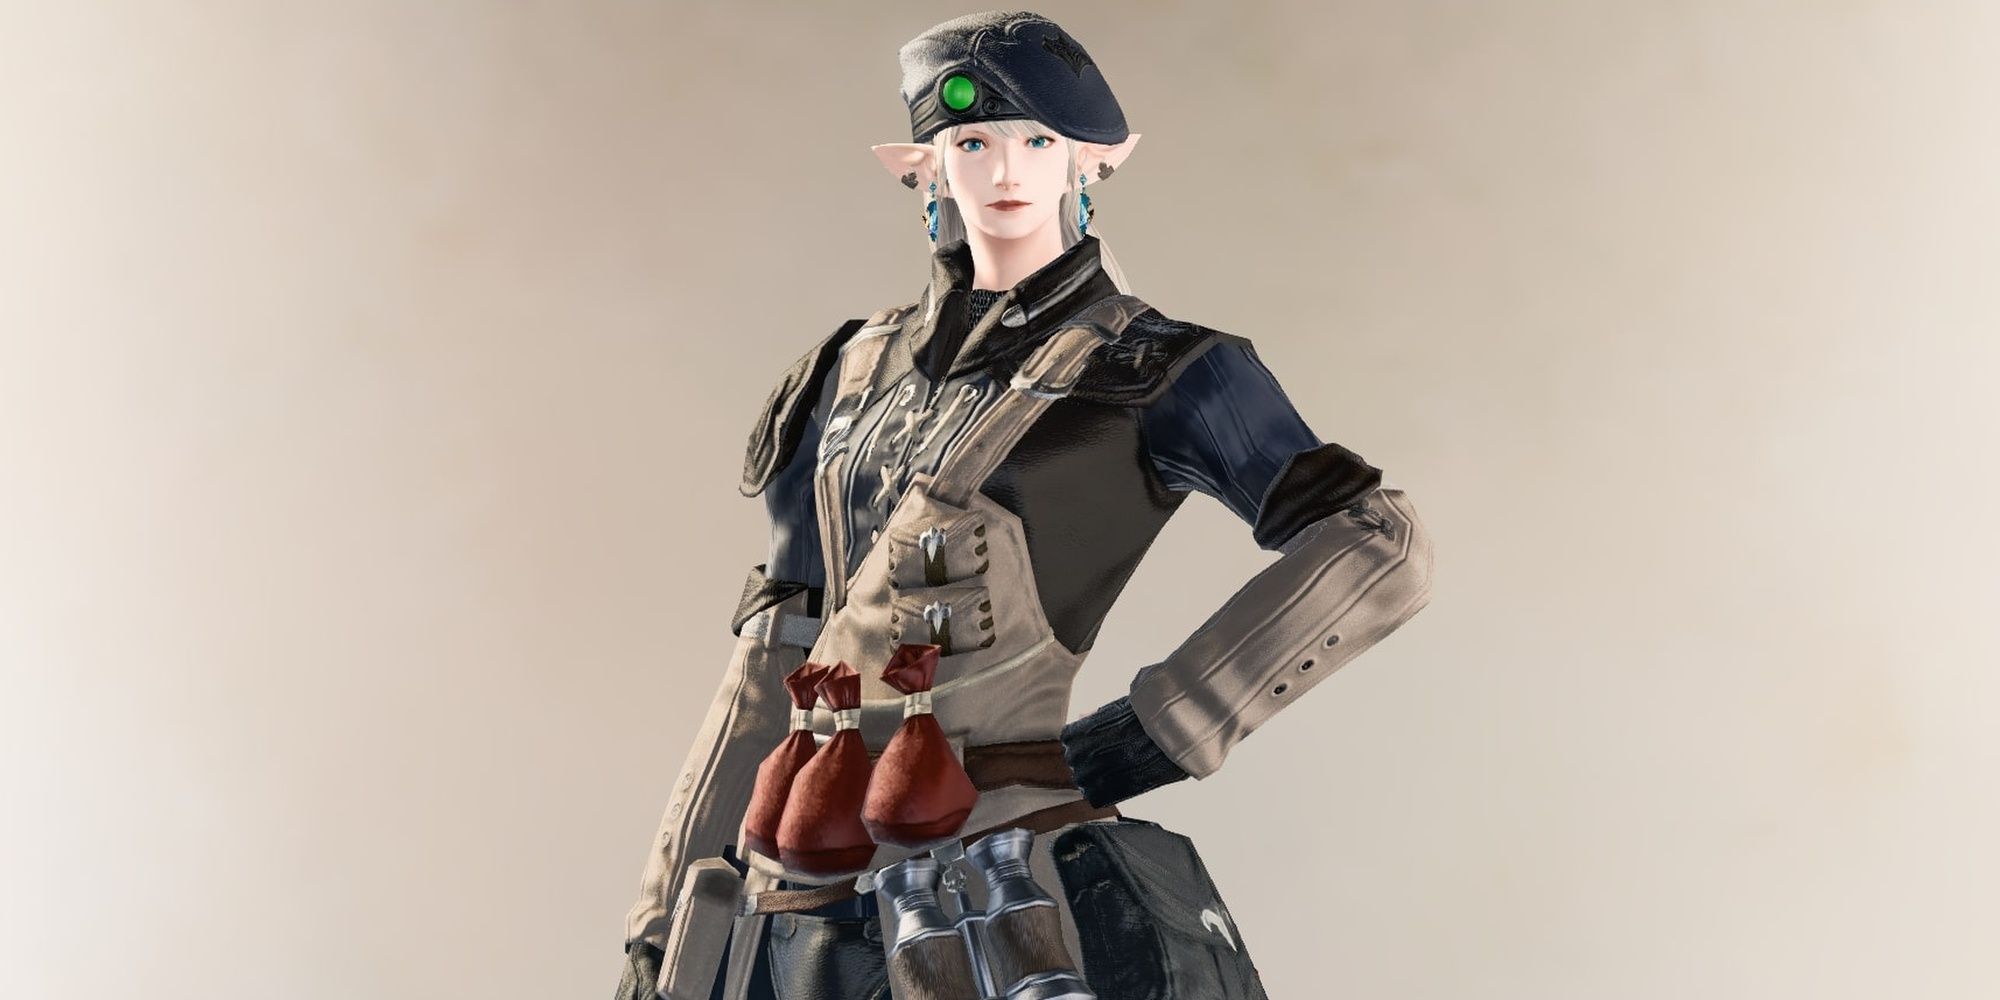 Final Fantasy 14 Elezen Character in Royal Volunteer Armor Against an Off-White Background